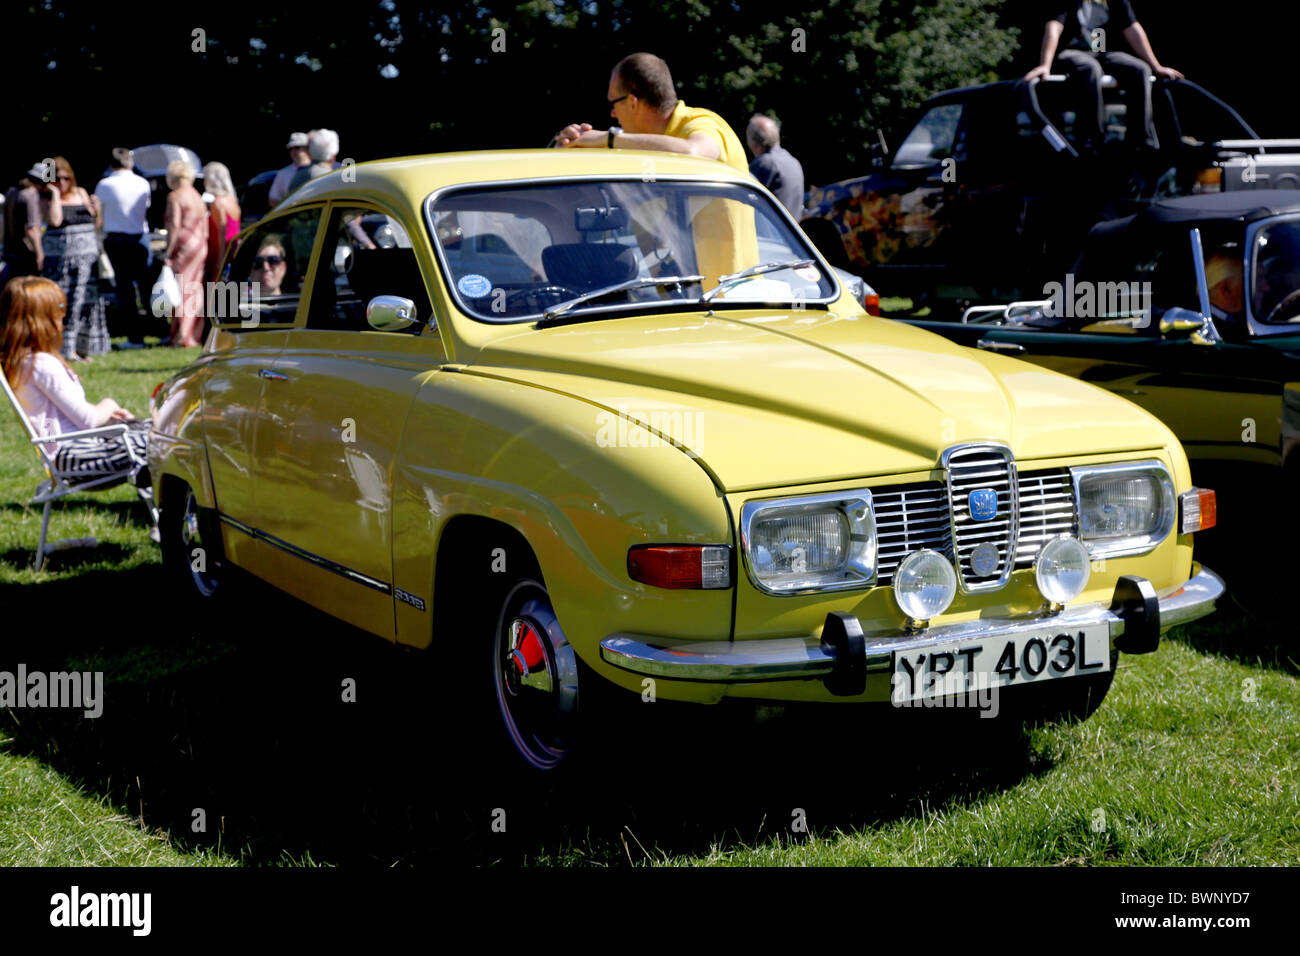 Giallo SAAB 96 CLASSIC CAR STAINDROP YORKSHIRE RABY CASTLE STAINDROP NORTH YORKSHIRE STAINDROP North Yorkshire 22 Agosto 2010 Foto Stock